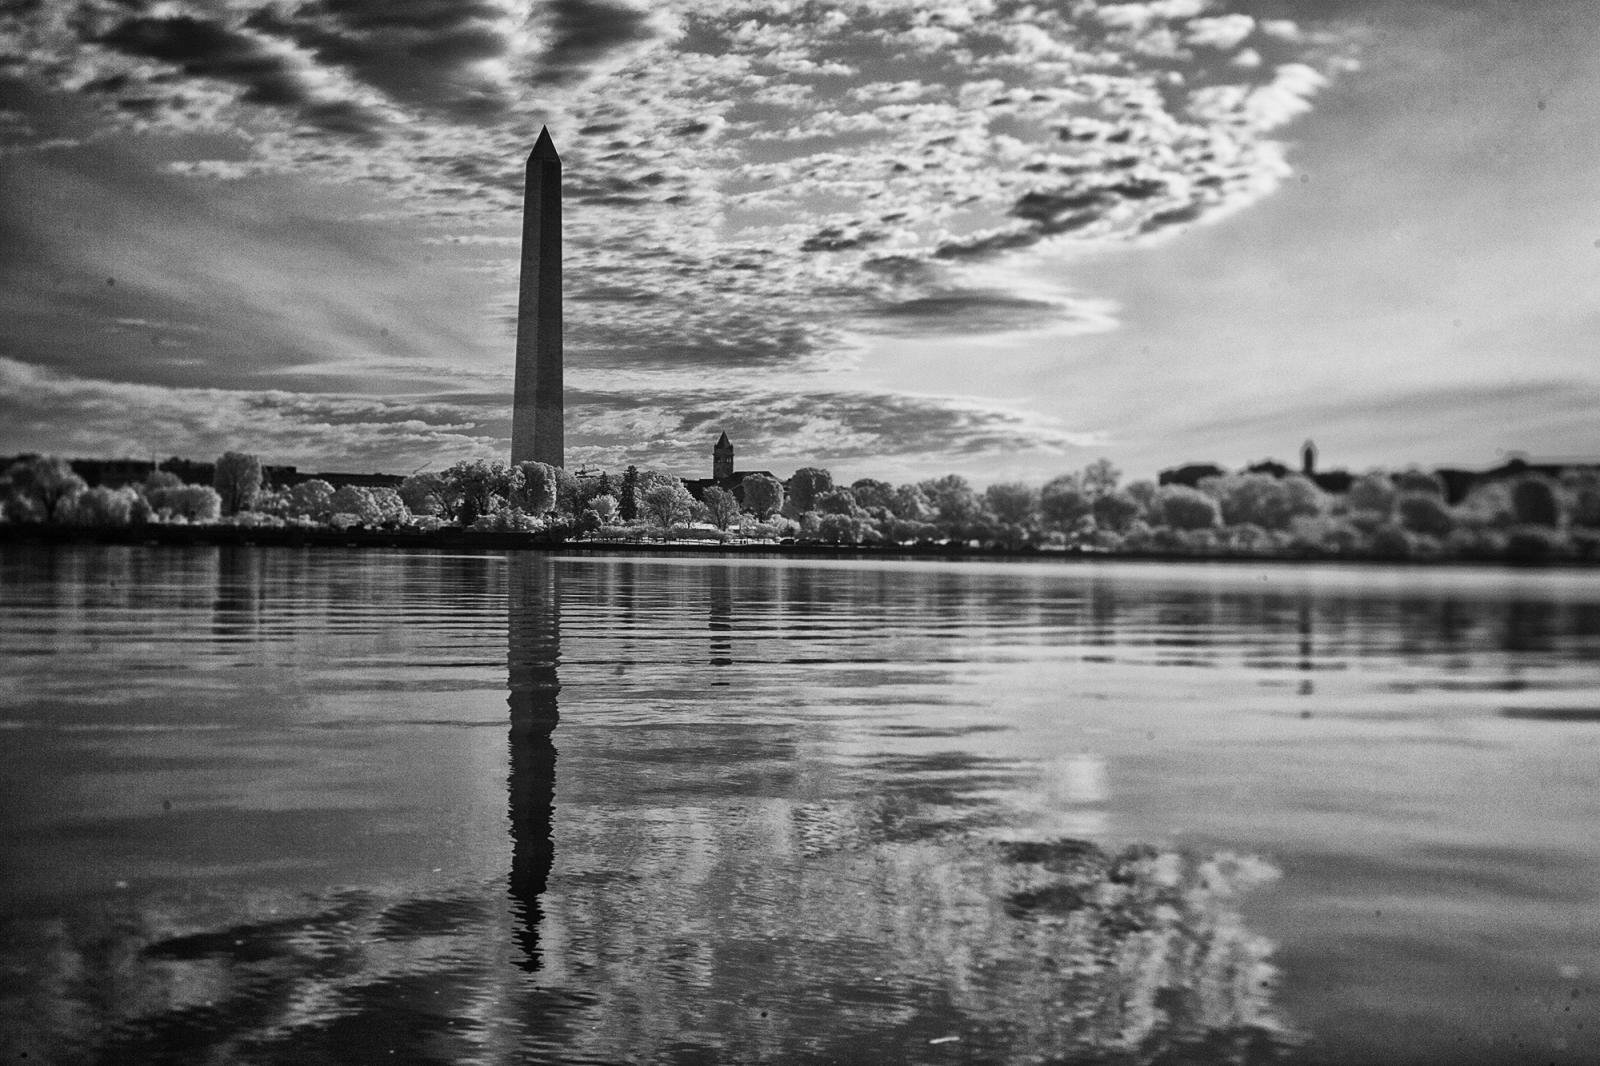 The Washington Monument seen from near the FDR Memorial